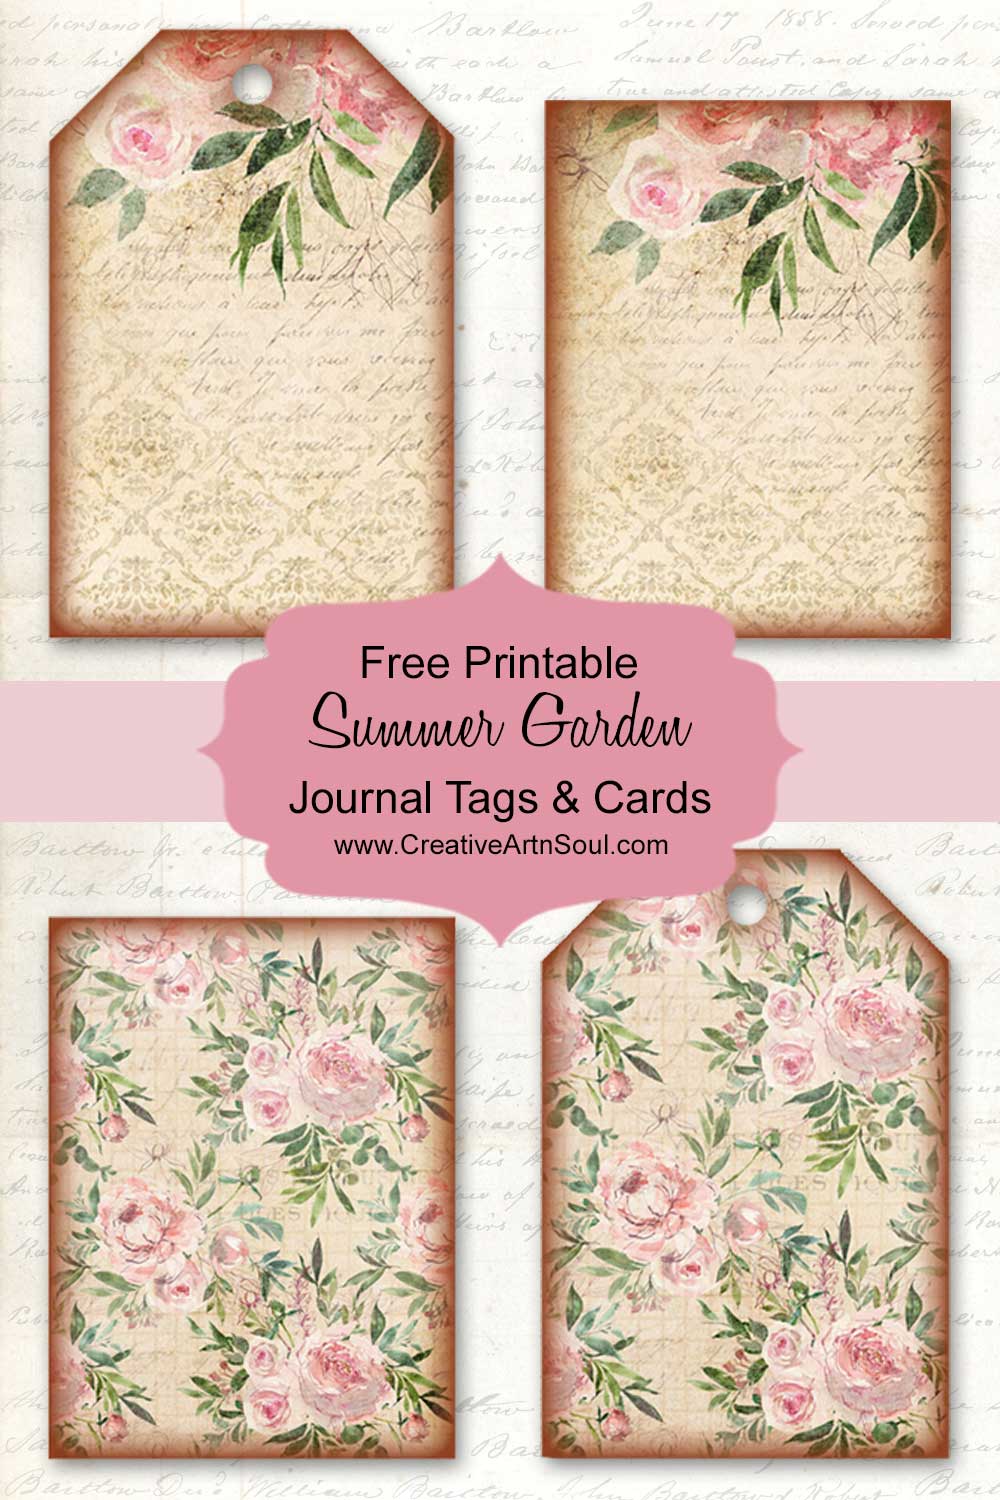 Free Printable Summer Garden Junk Journal Tags and Cards